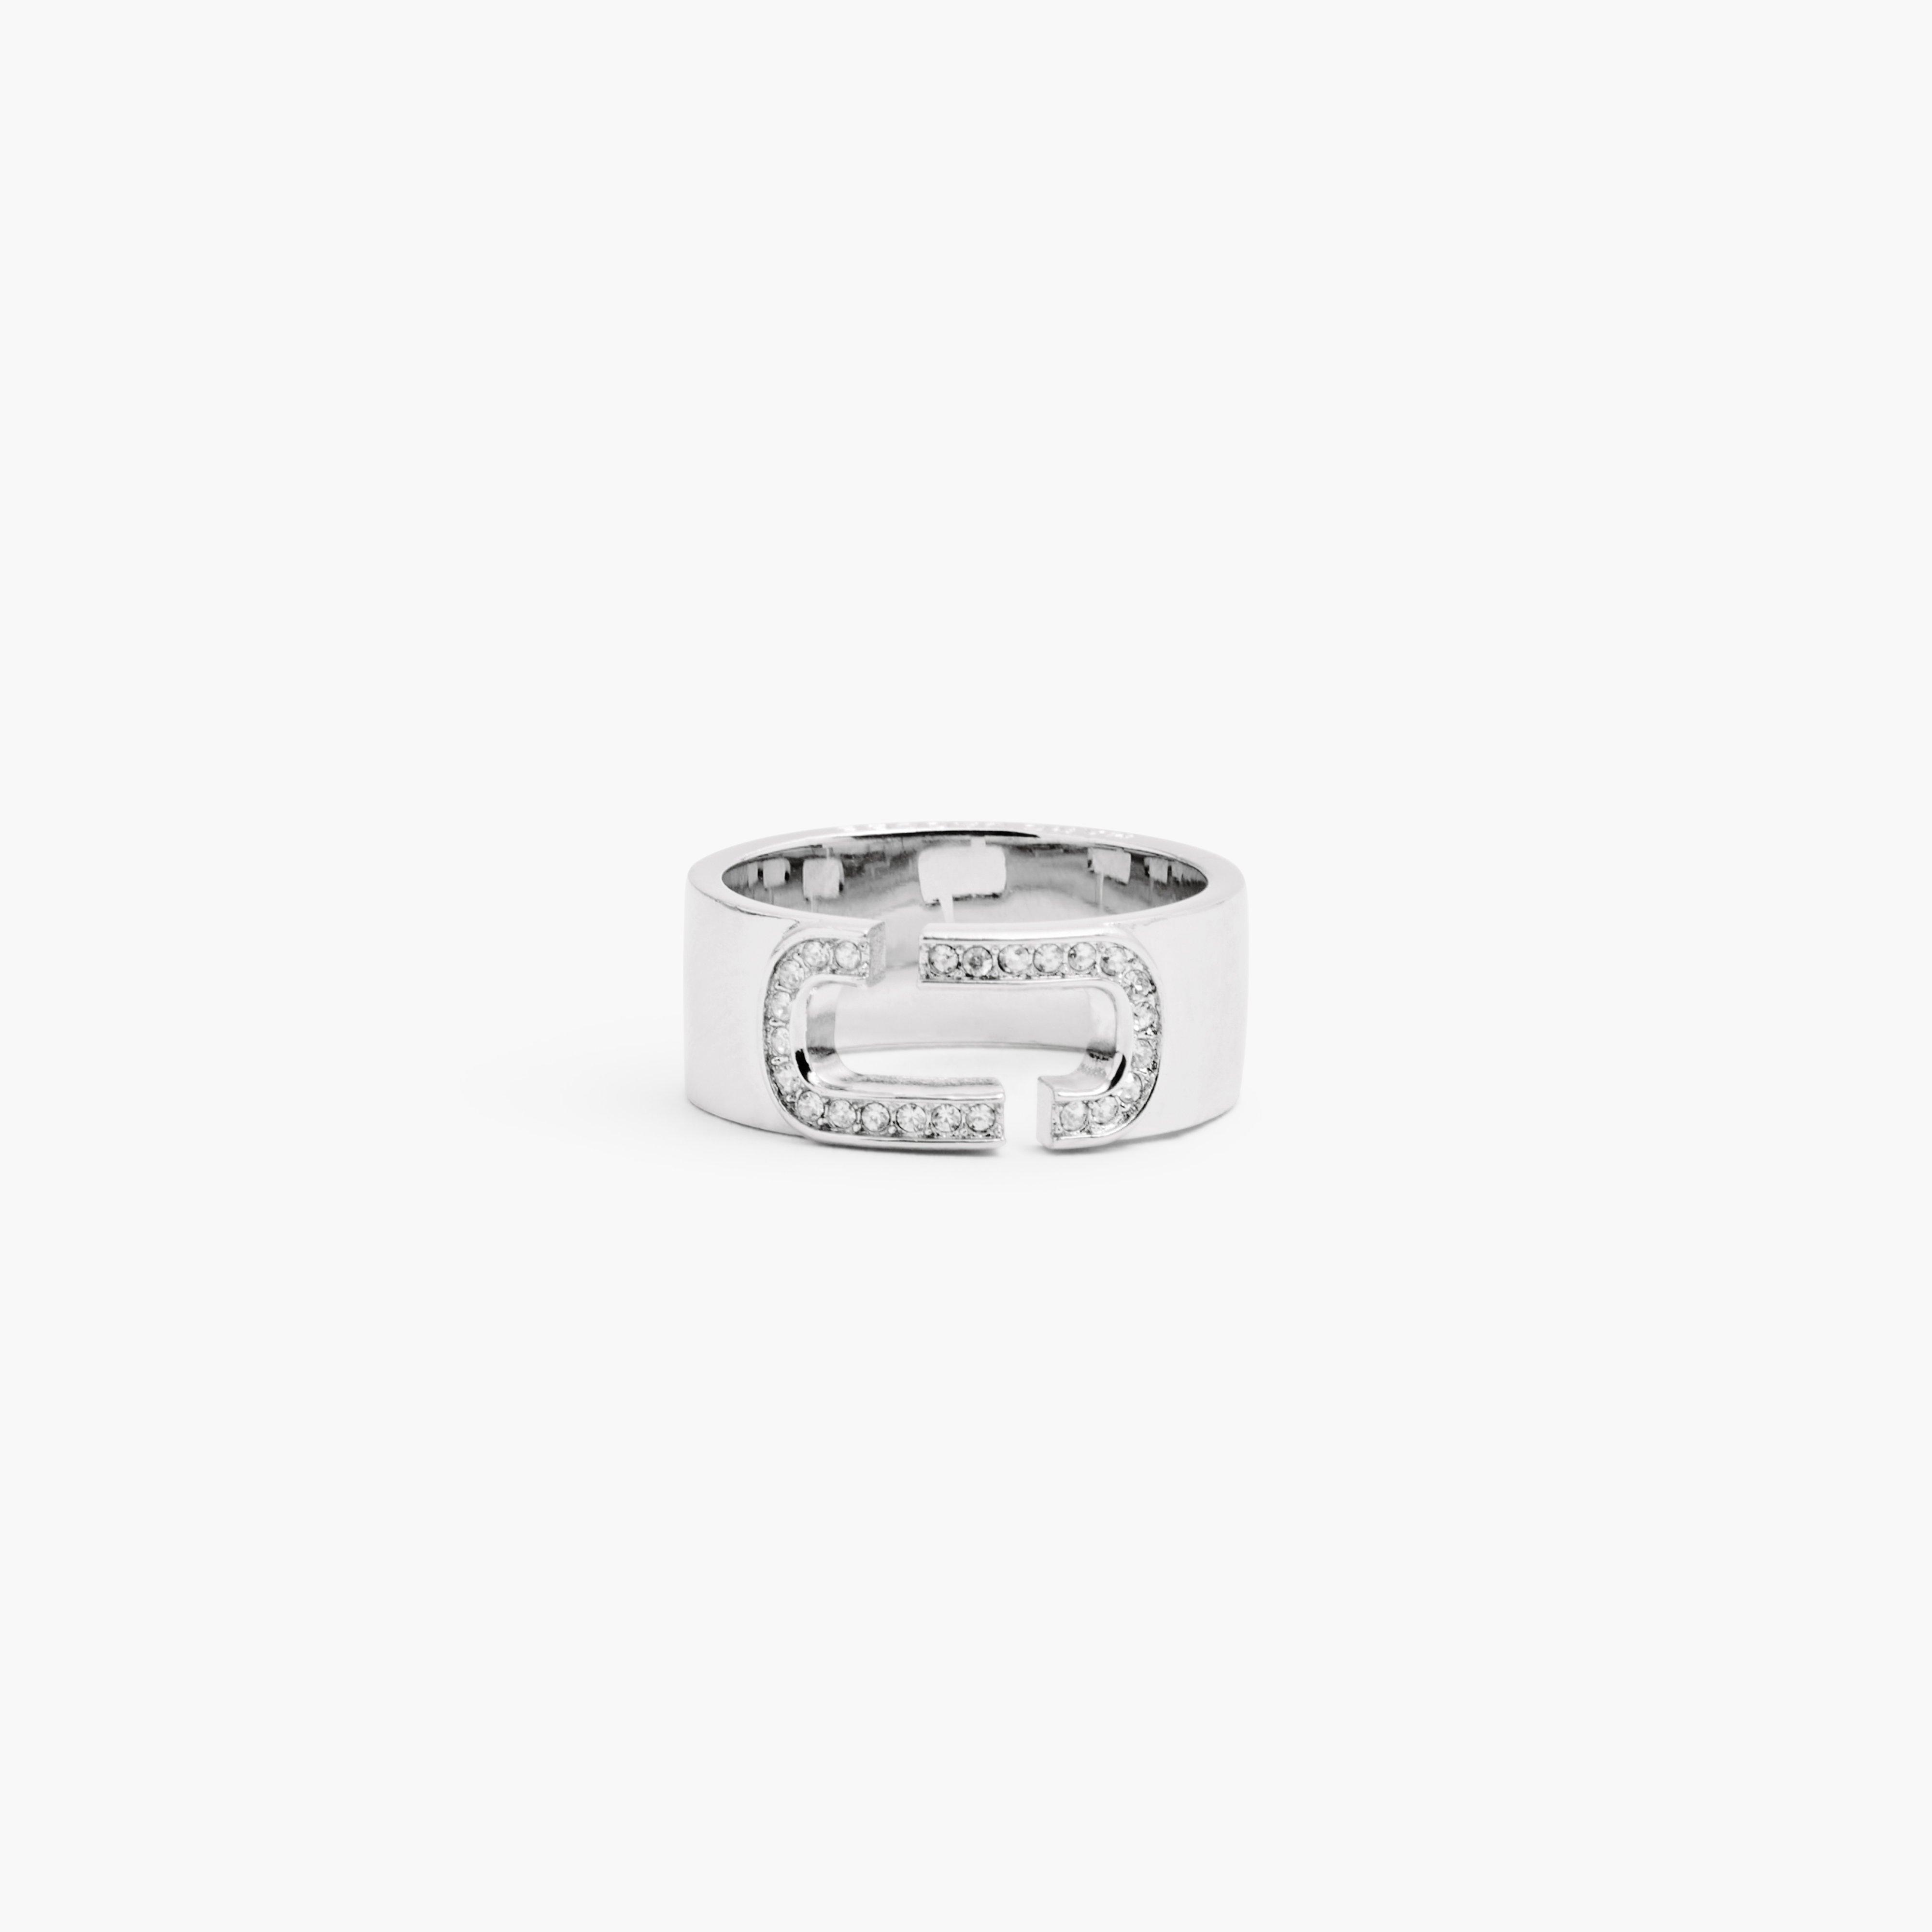 Marc by Marc jacobs The J Marc Crystal Ring,CRYSTAL/SILVER